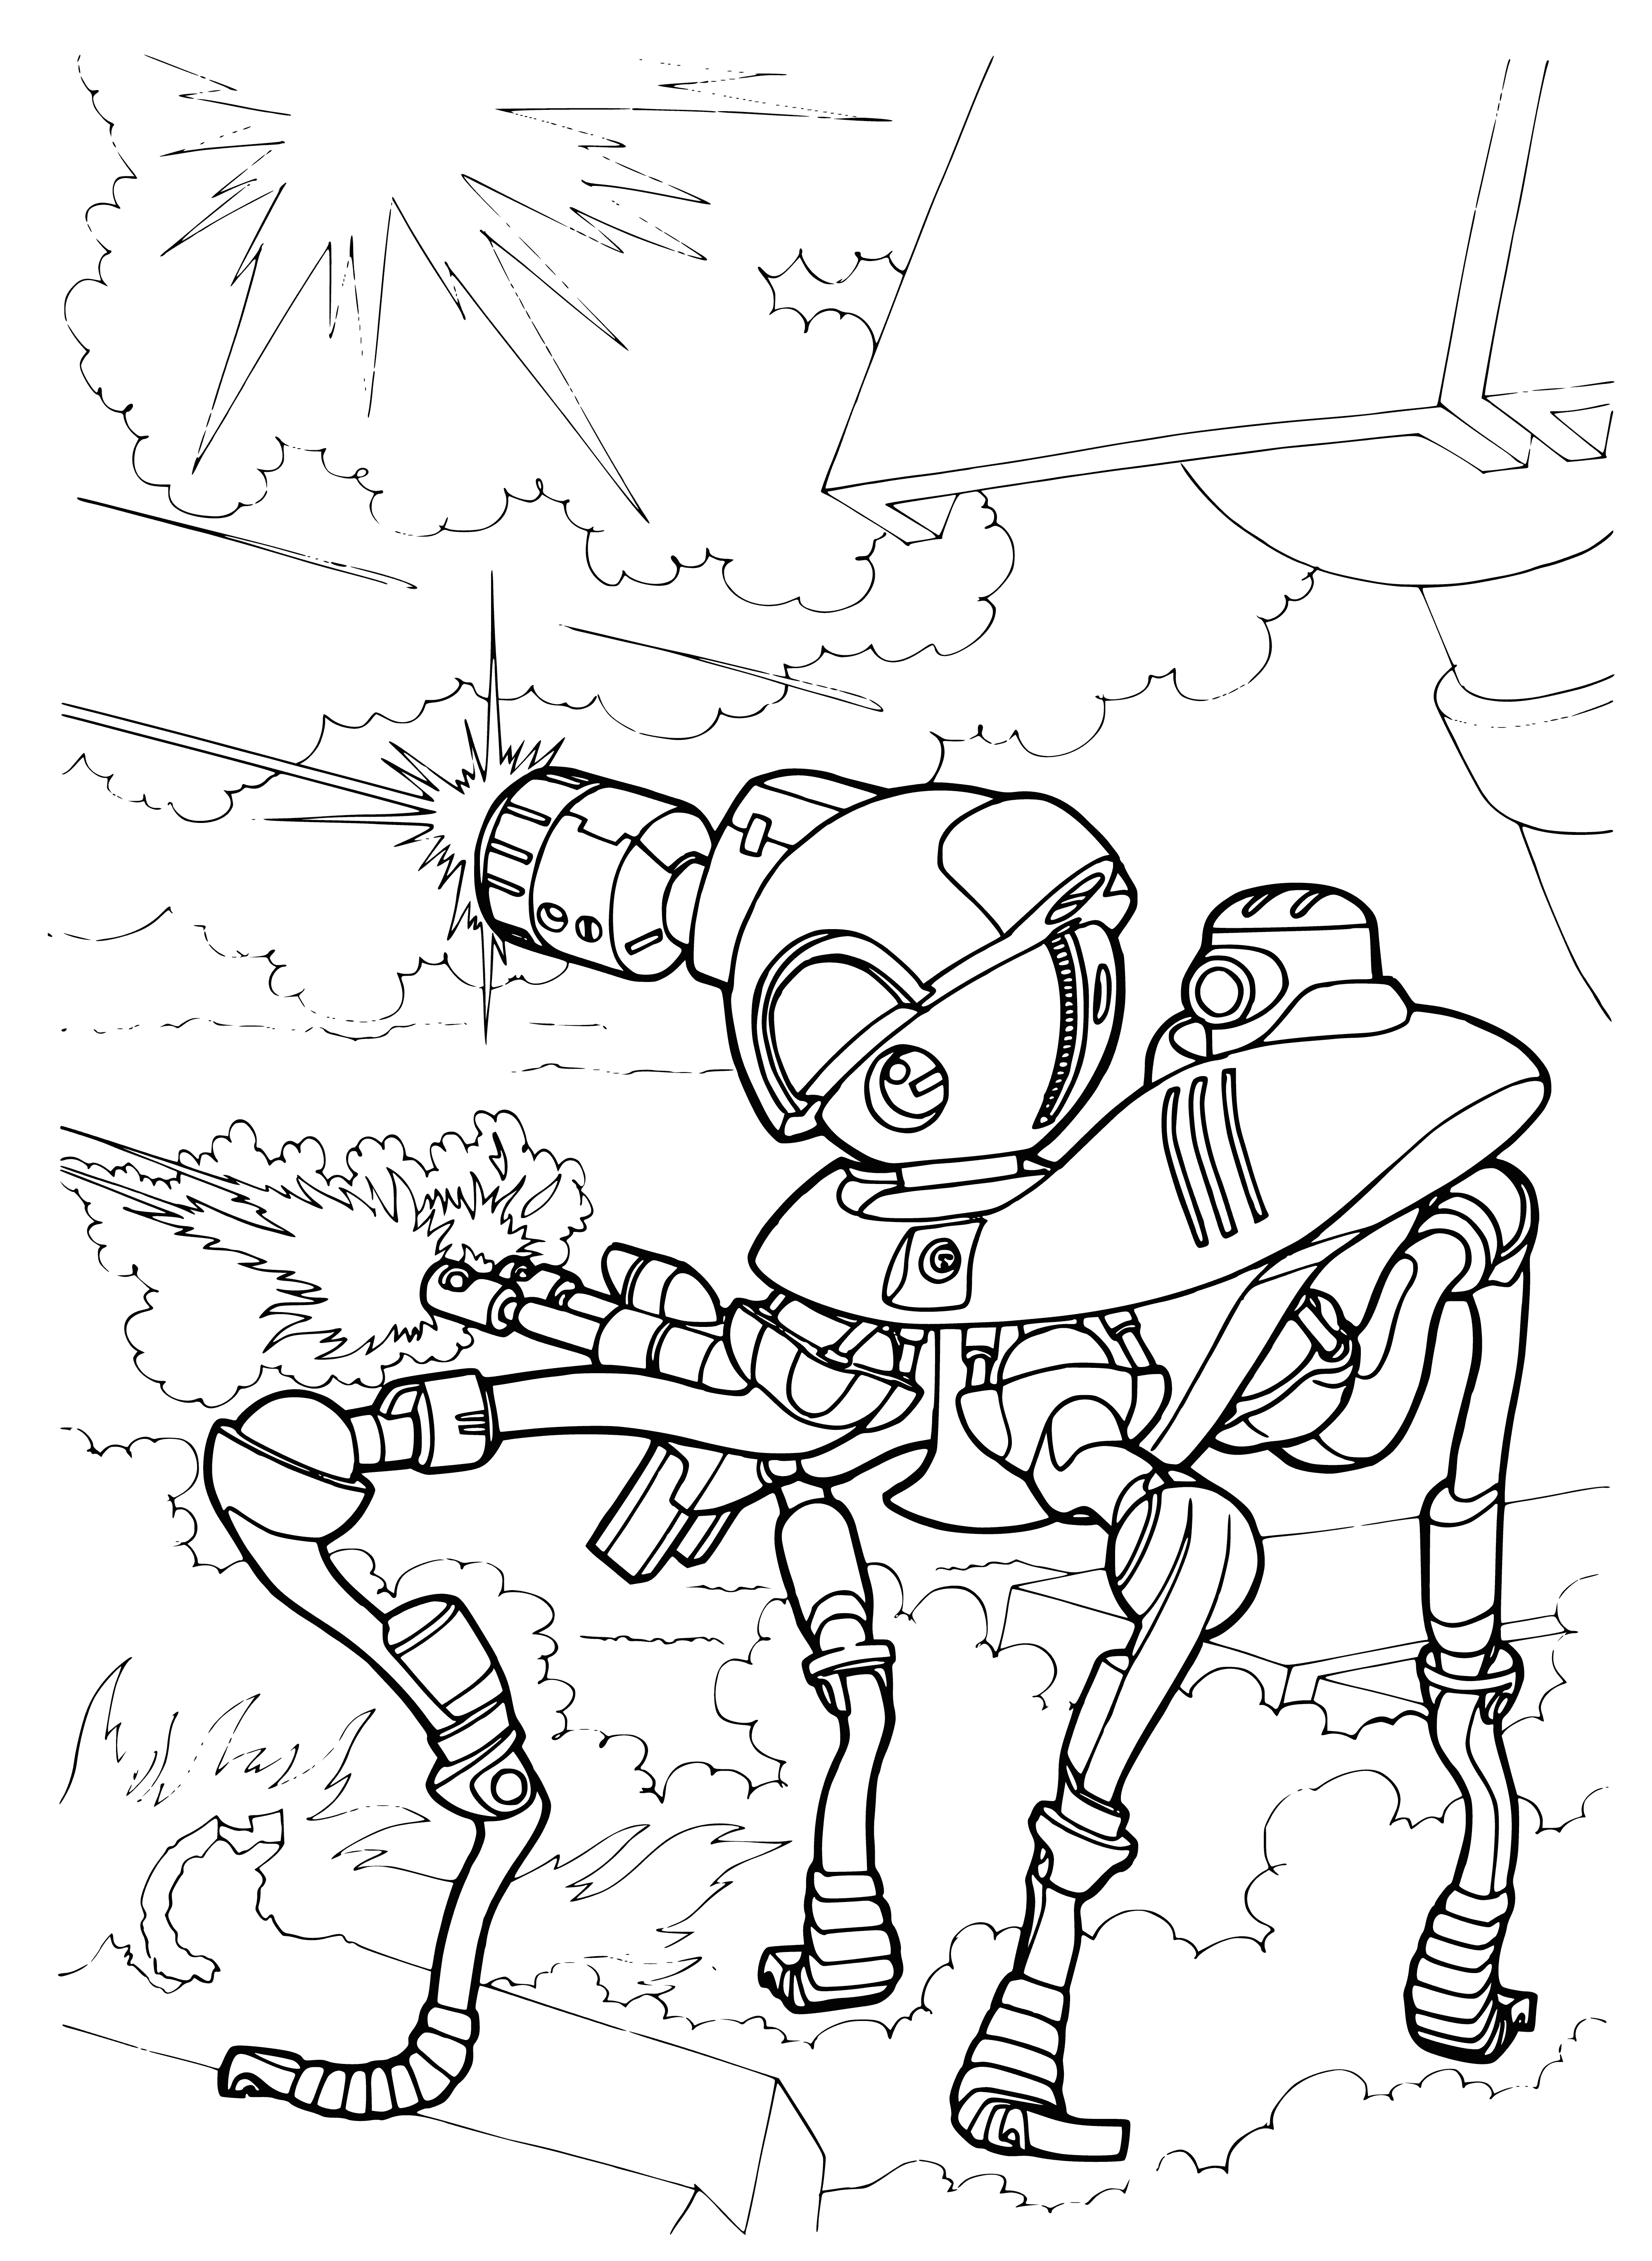 coloring page: Cyborg stands in a battlefield, holding a gun & sword. Background reveals a partially destroyed city.